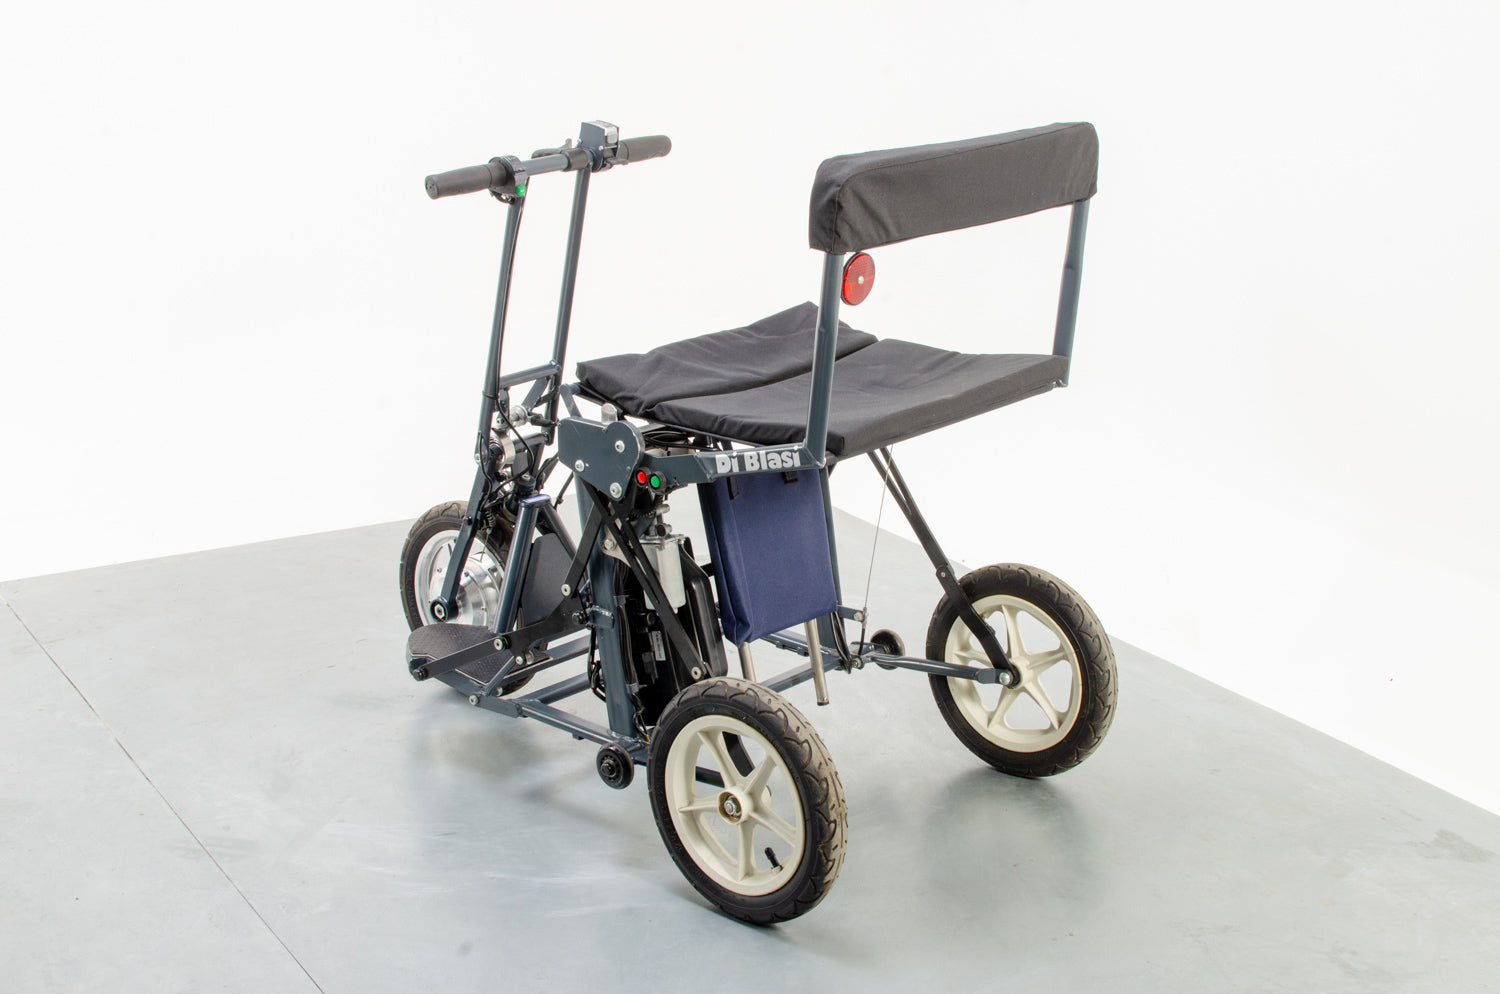 2014 DiBlasi R30 Automatic Folding Lightweight Mobility Scooter with Lithium Battery